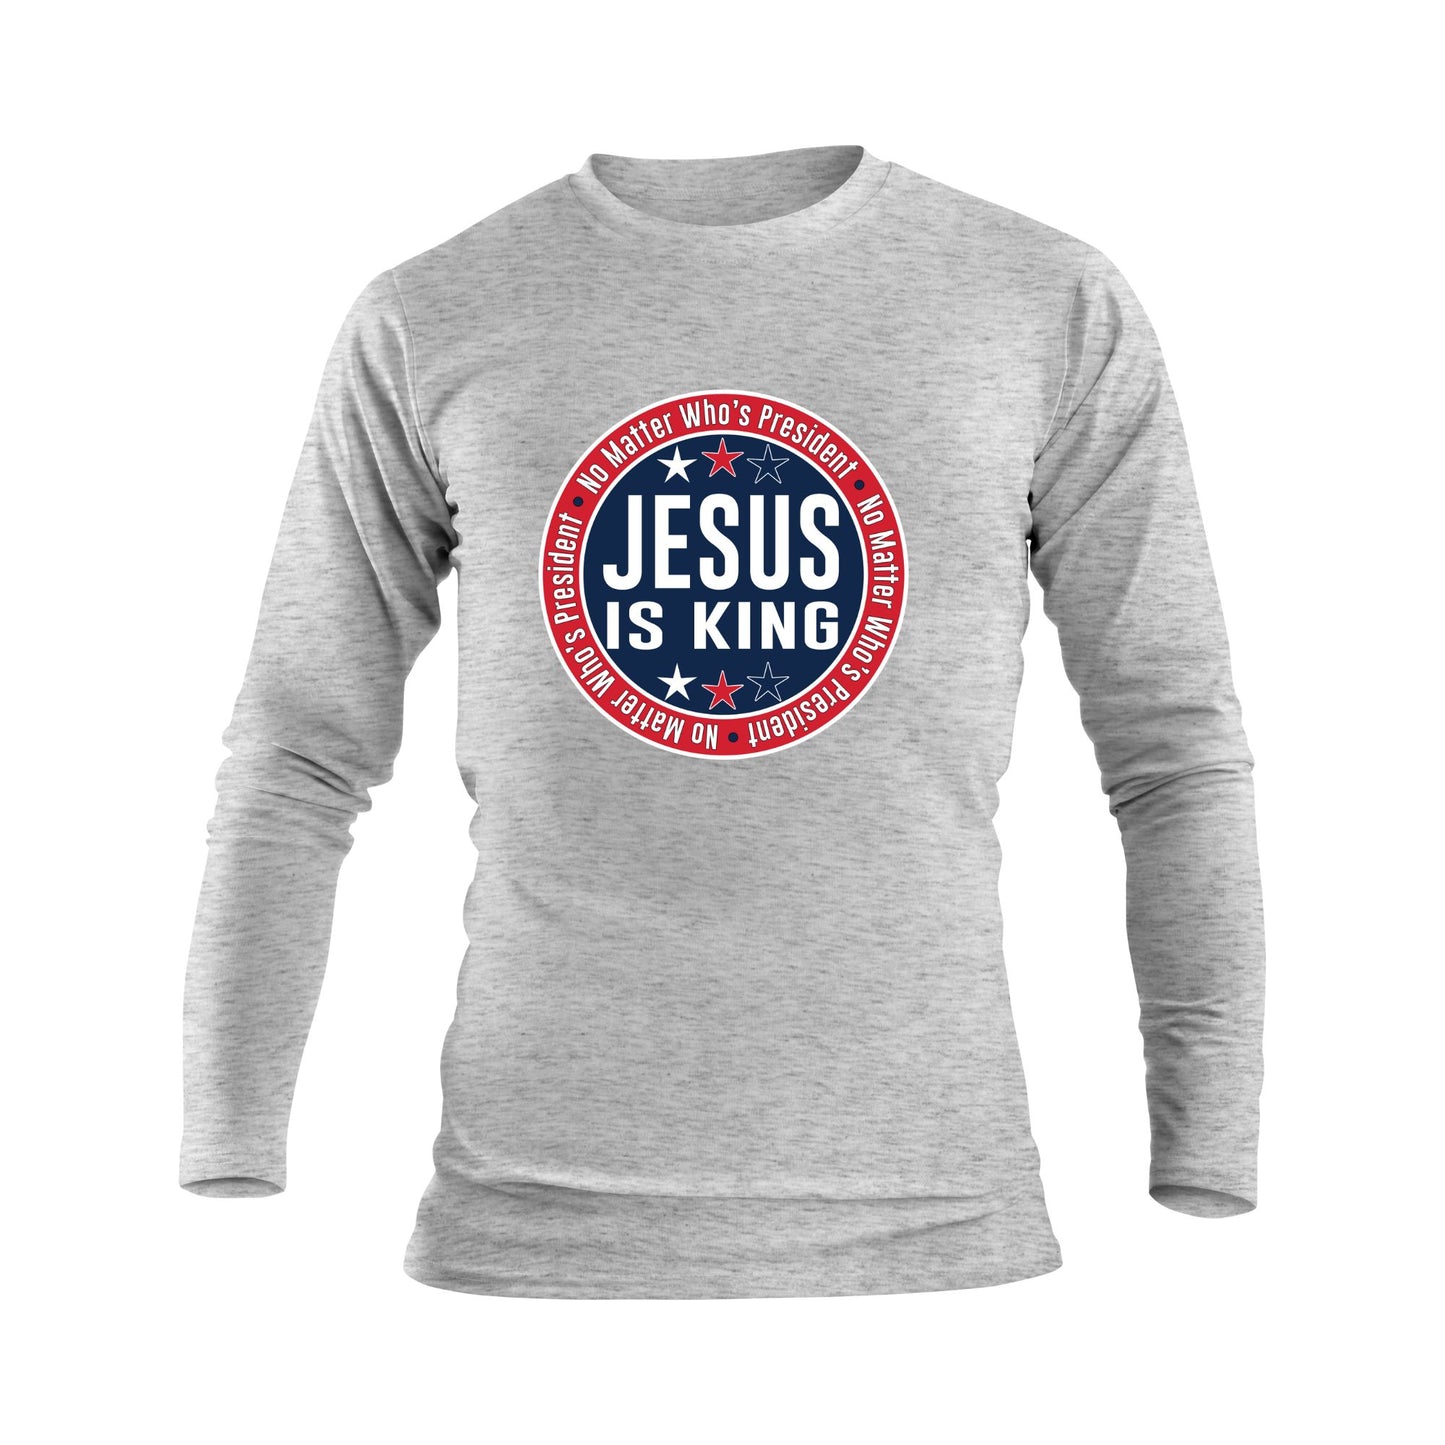 No Matter Who is President Jesus is King Long Sleeve T-shirt